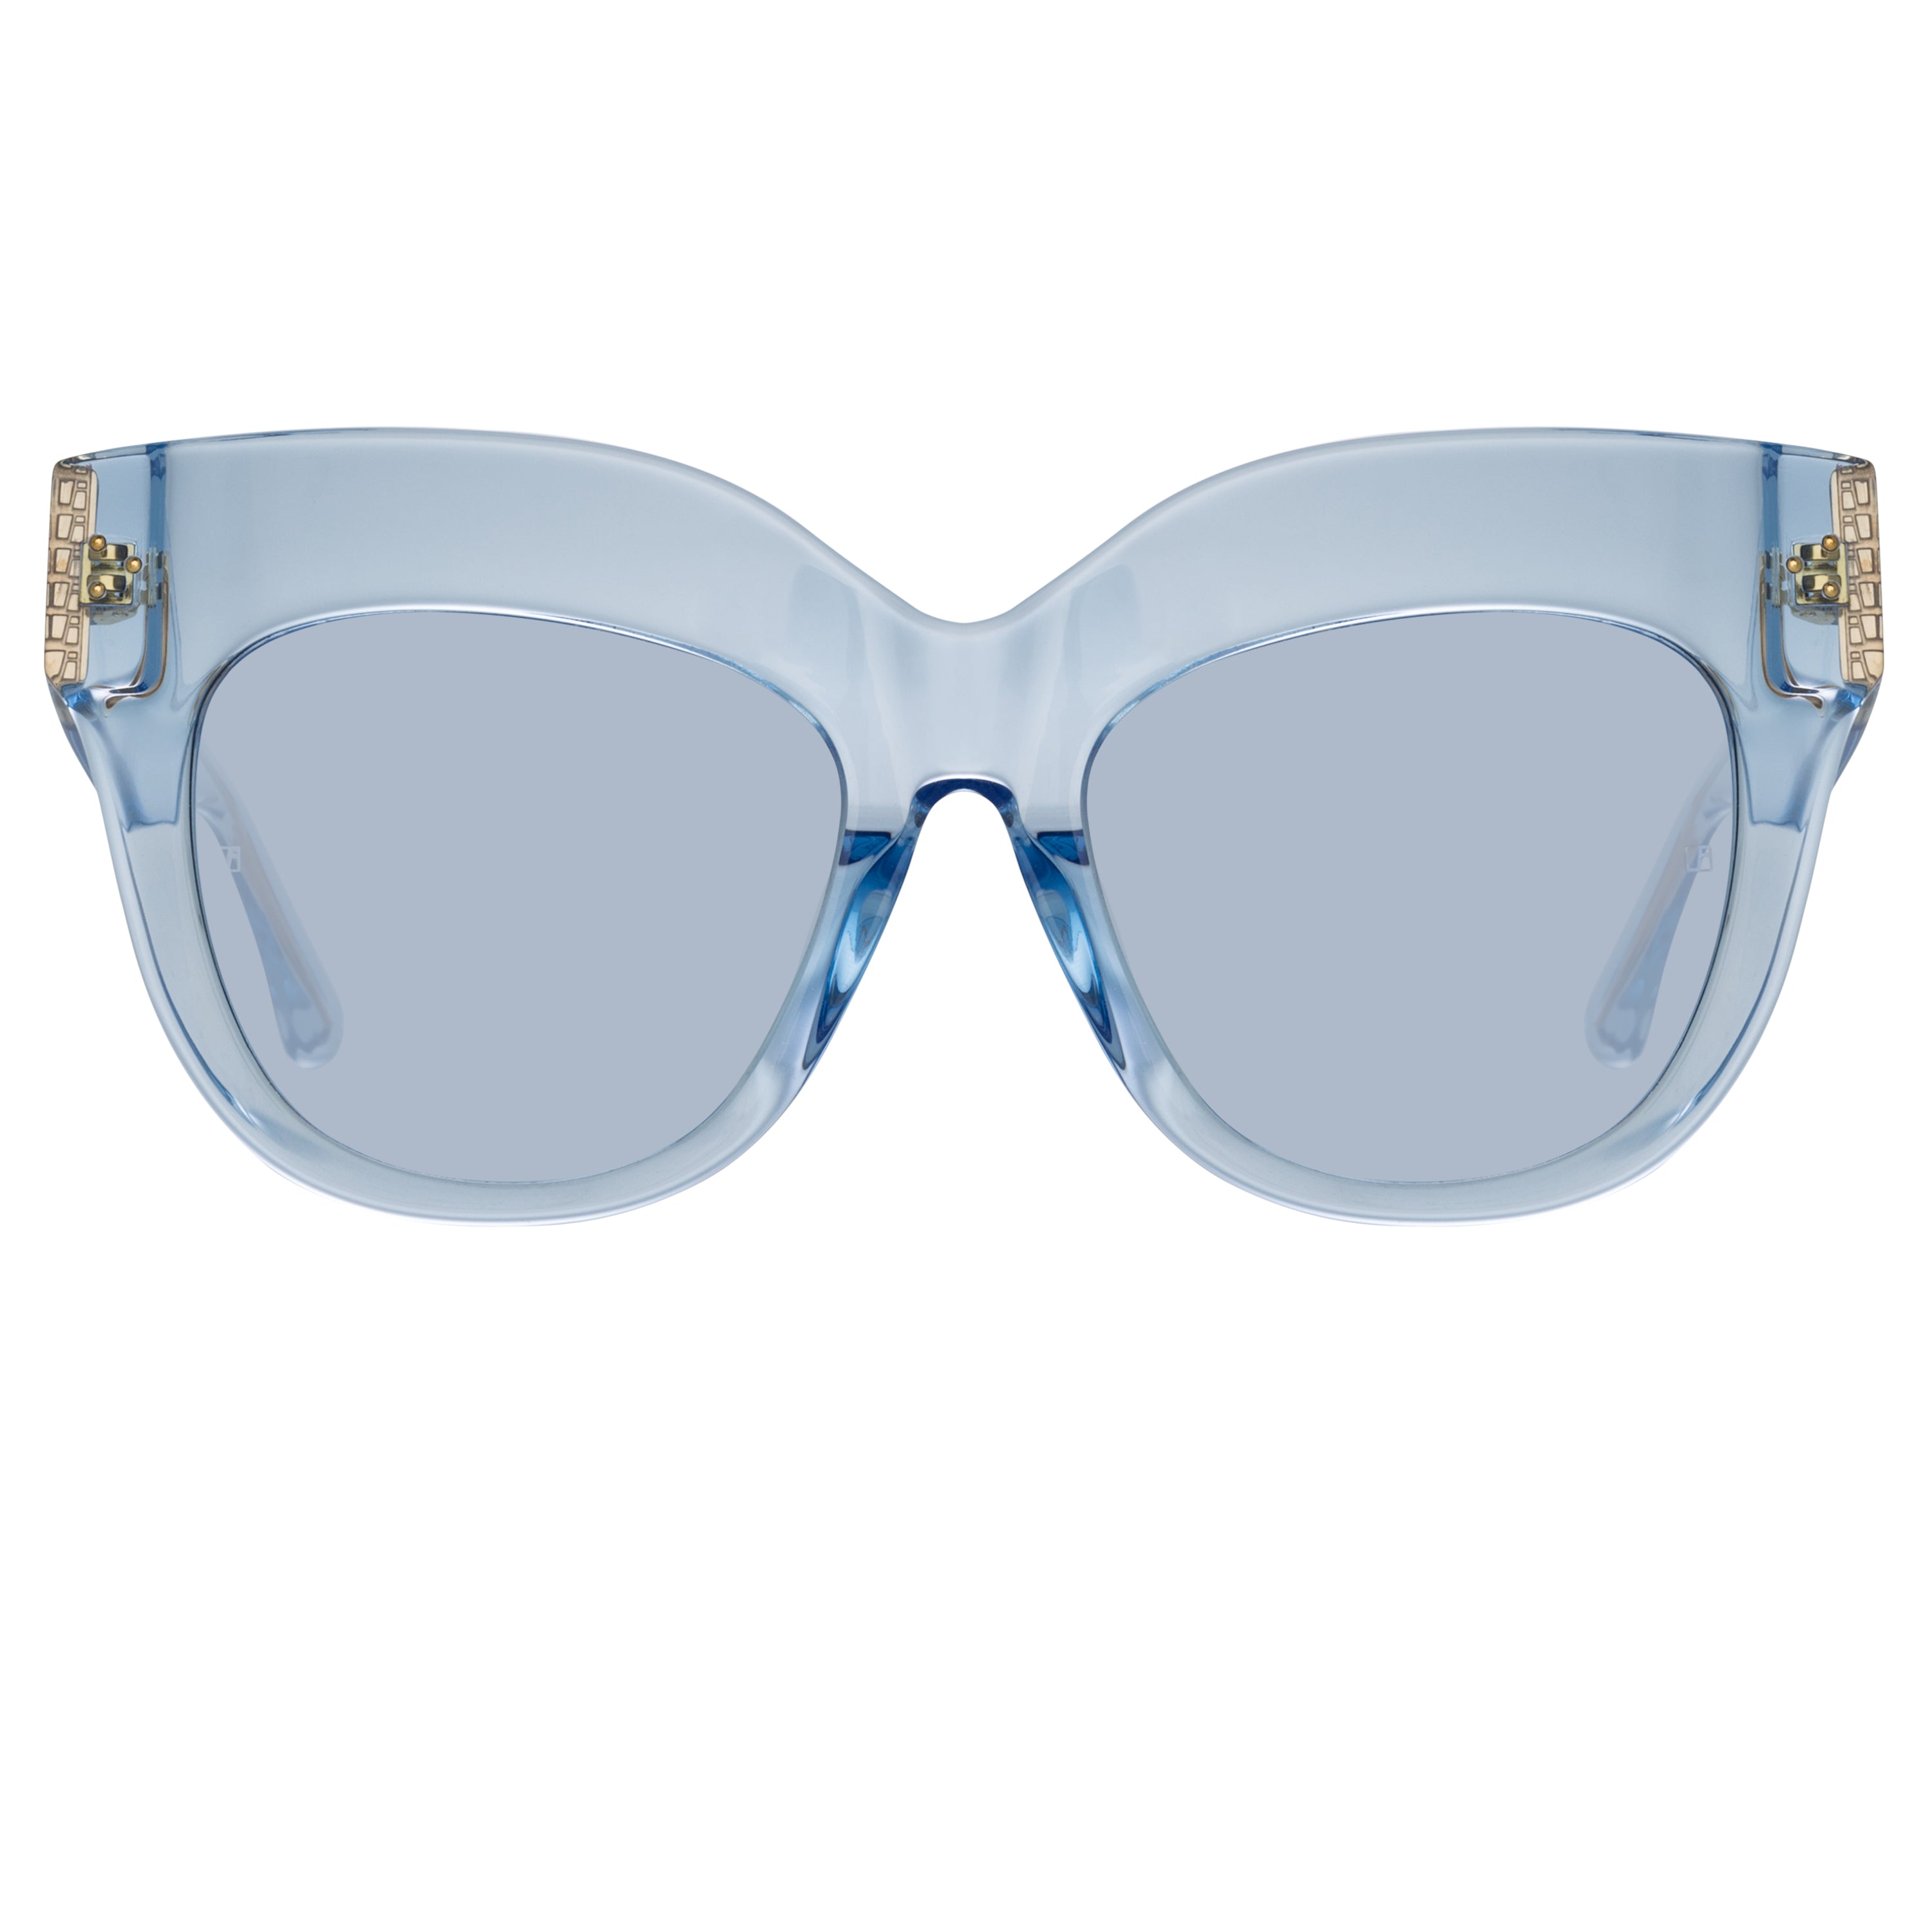 Dunaway Oversized Sunglasses in Blue